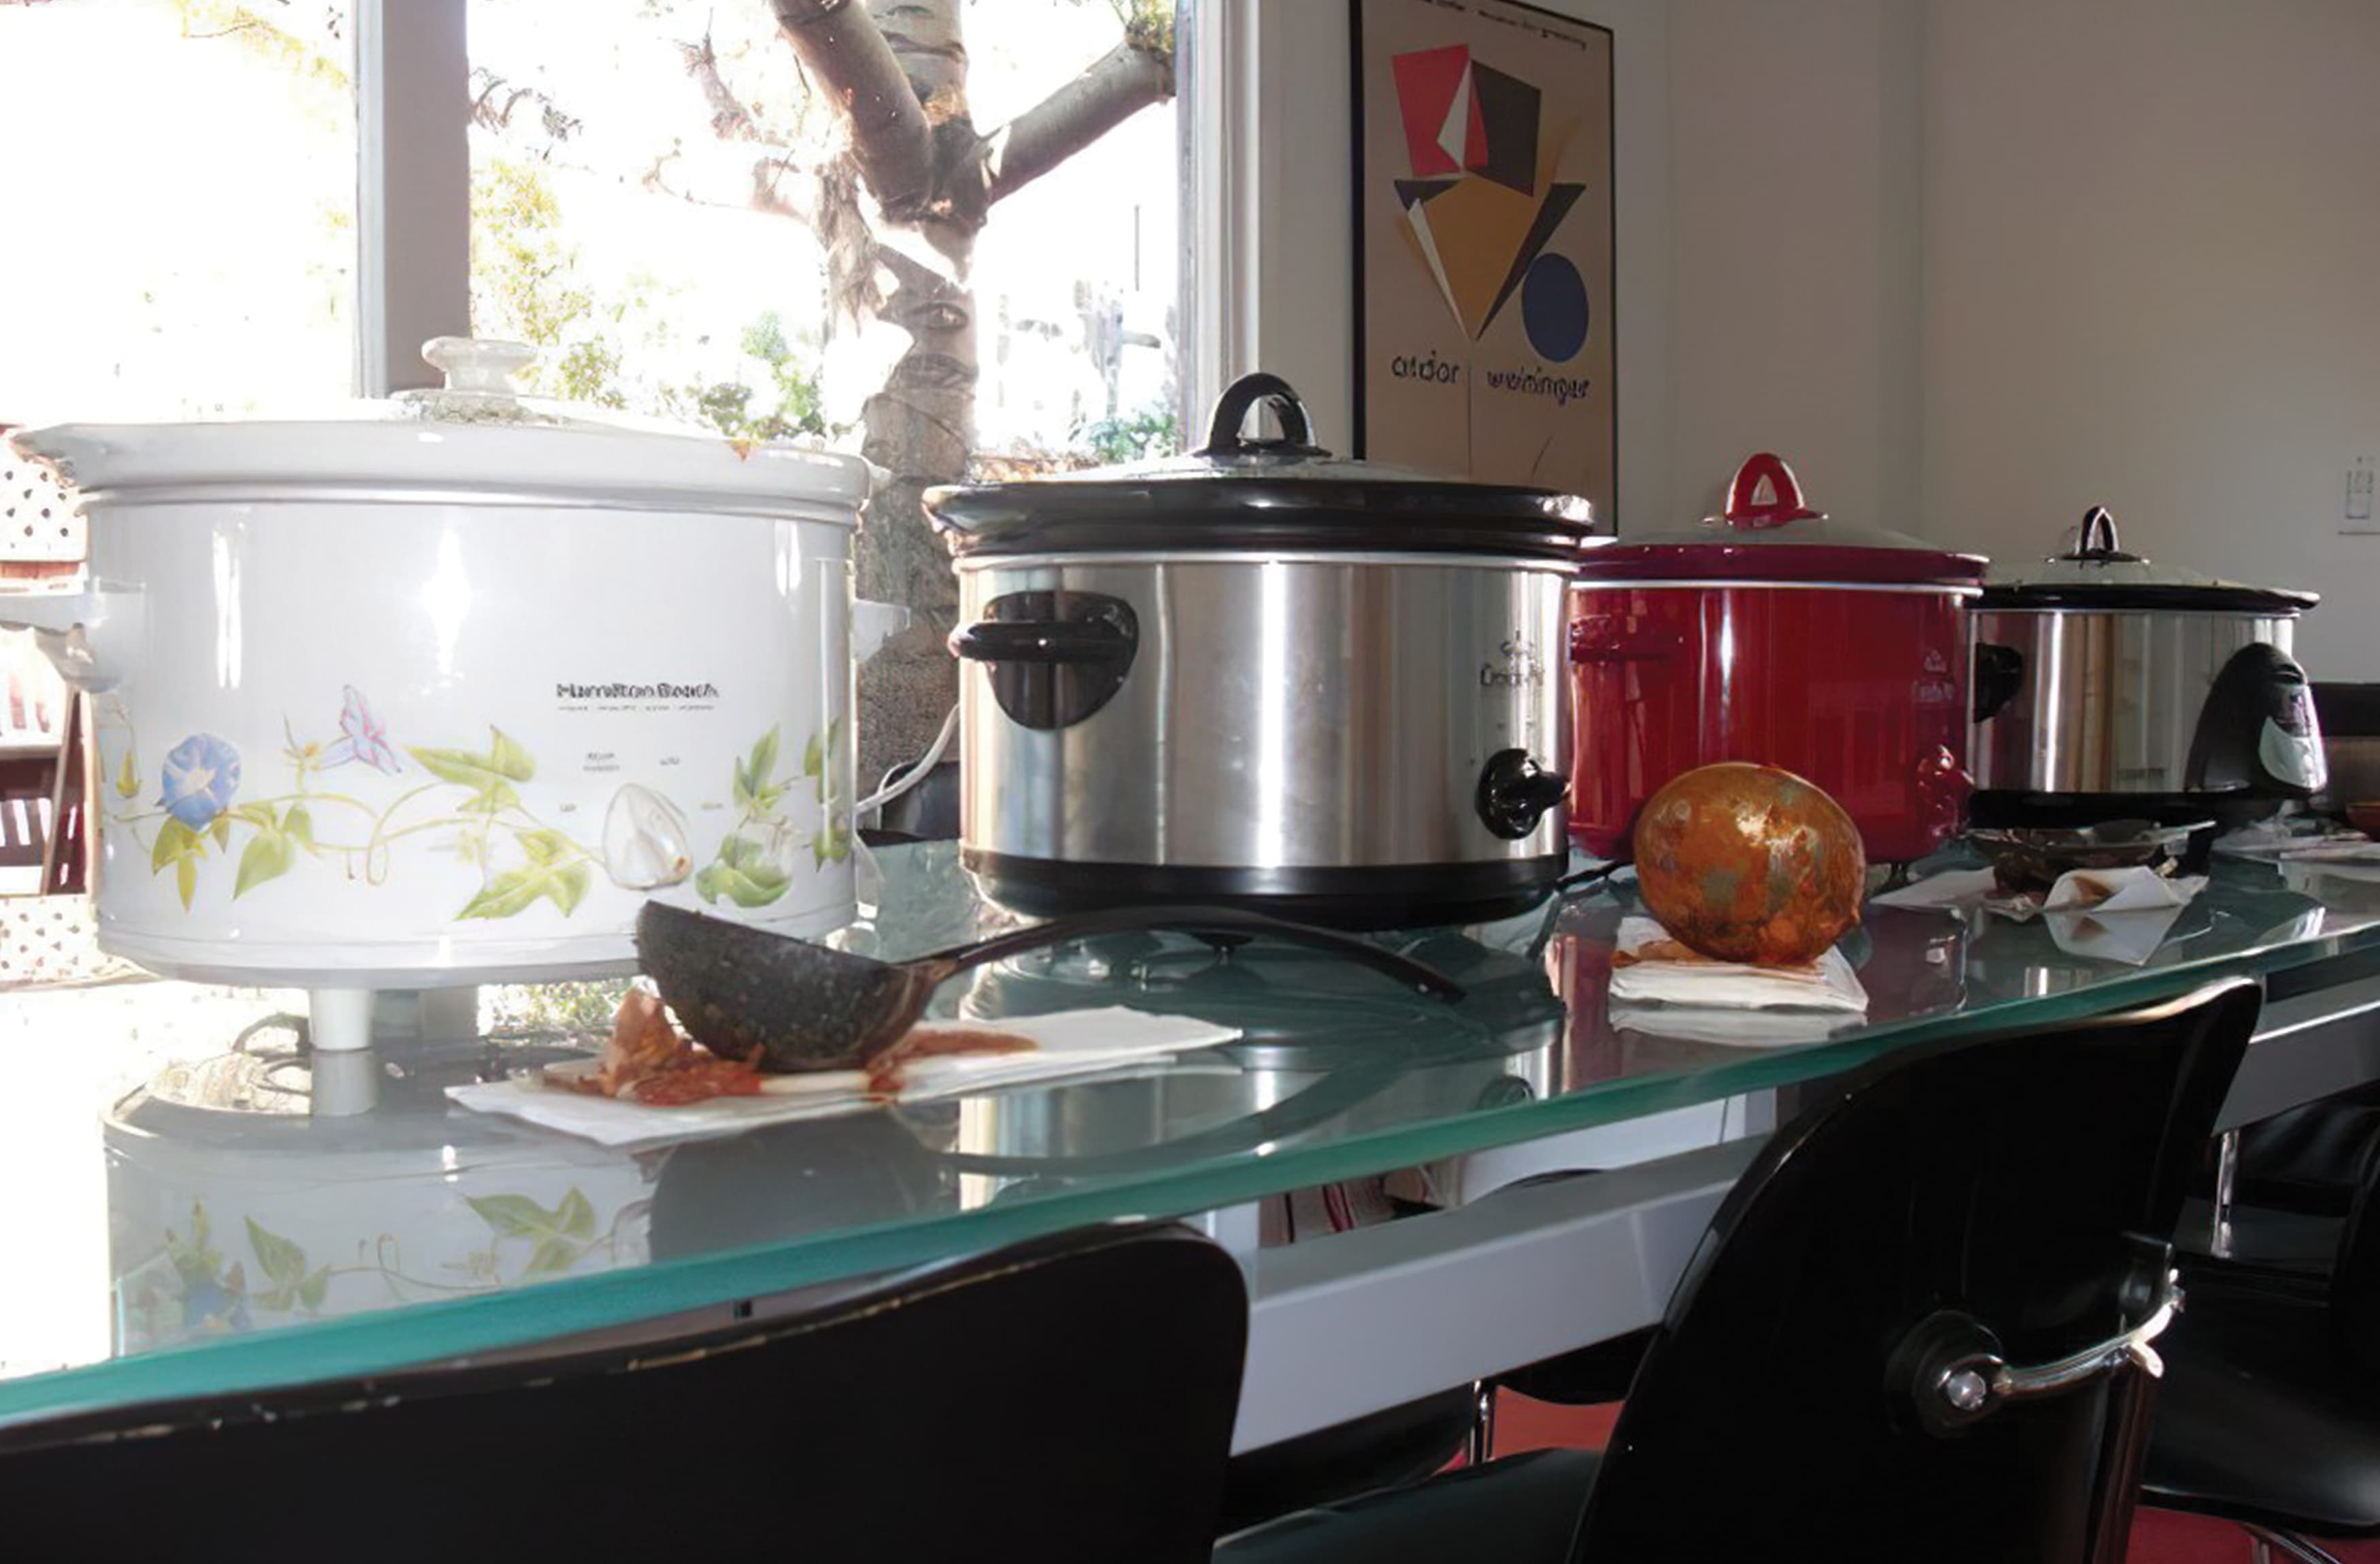 A photograph of some slow cookers taken during 2nd Annual RSM Chili Cook-Off.